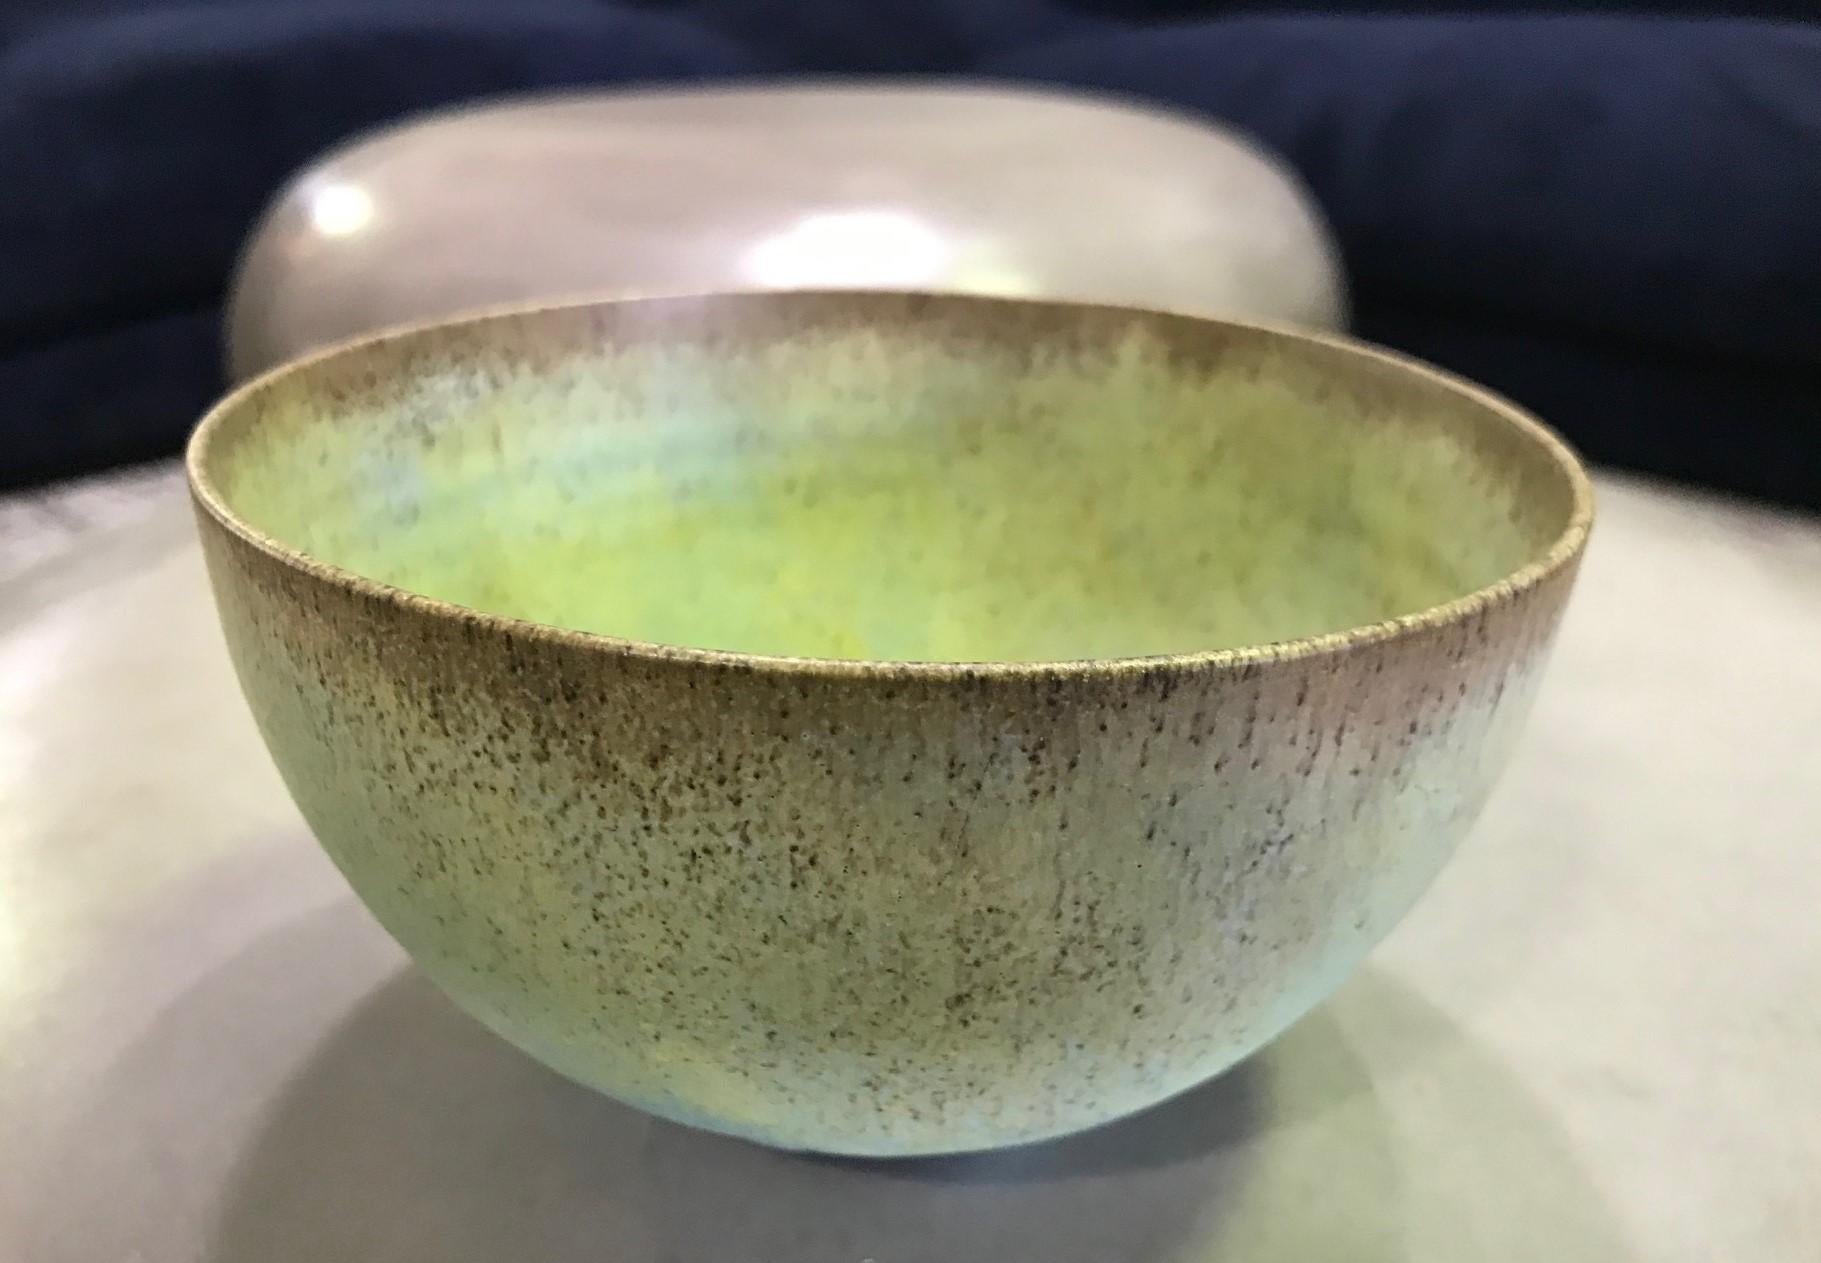 A masterful work by famed potters Otto and Gertrud Natzler. This round-shaped bowl was delicately hand thrown and formed by Gertrud and glazed by Otto with one of his famed early volcanic crater glazes which exhibits a vast array of colors ranging